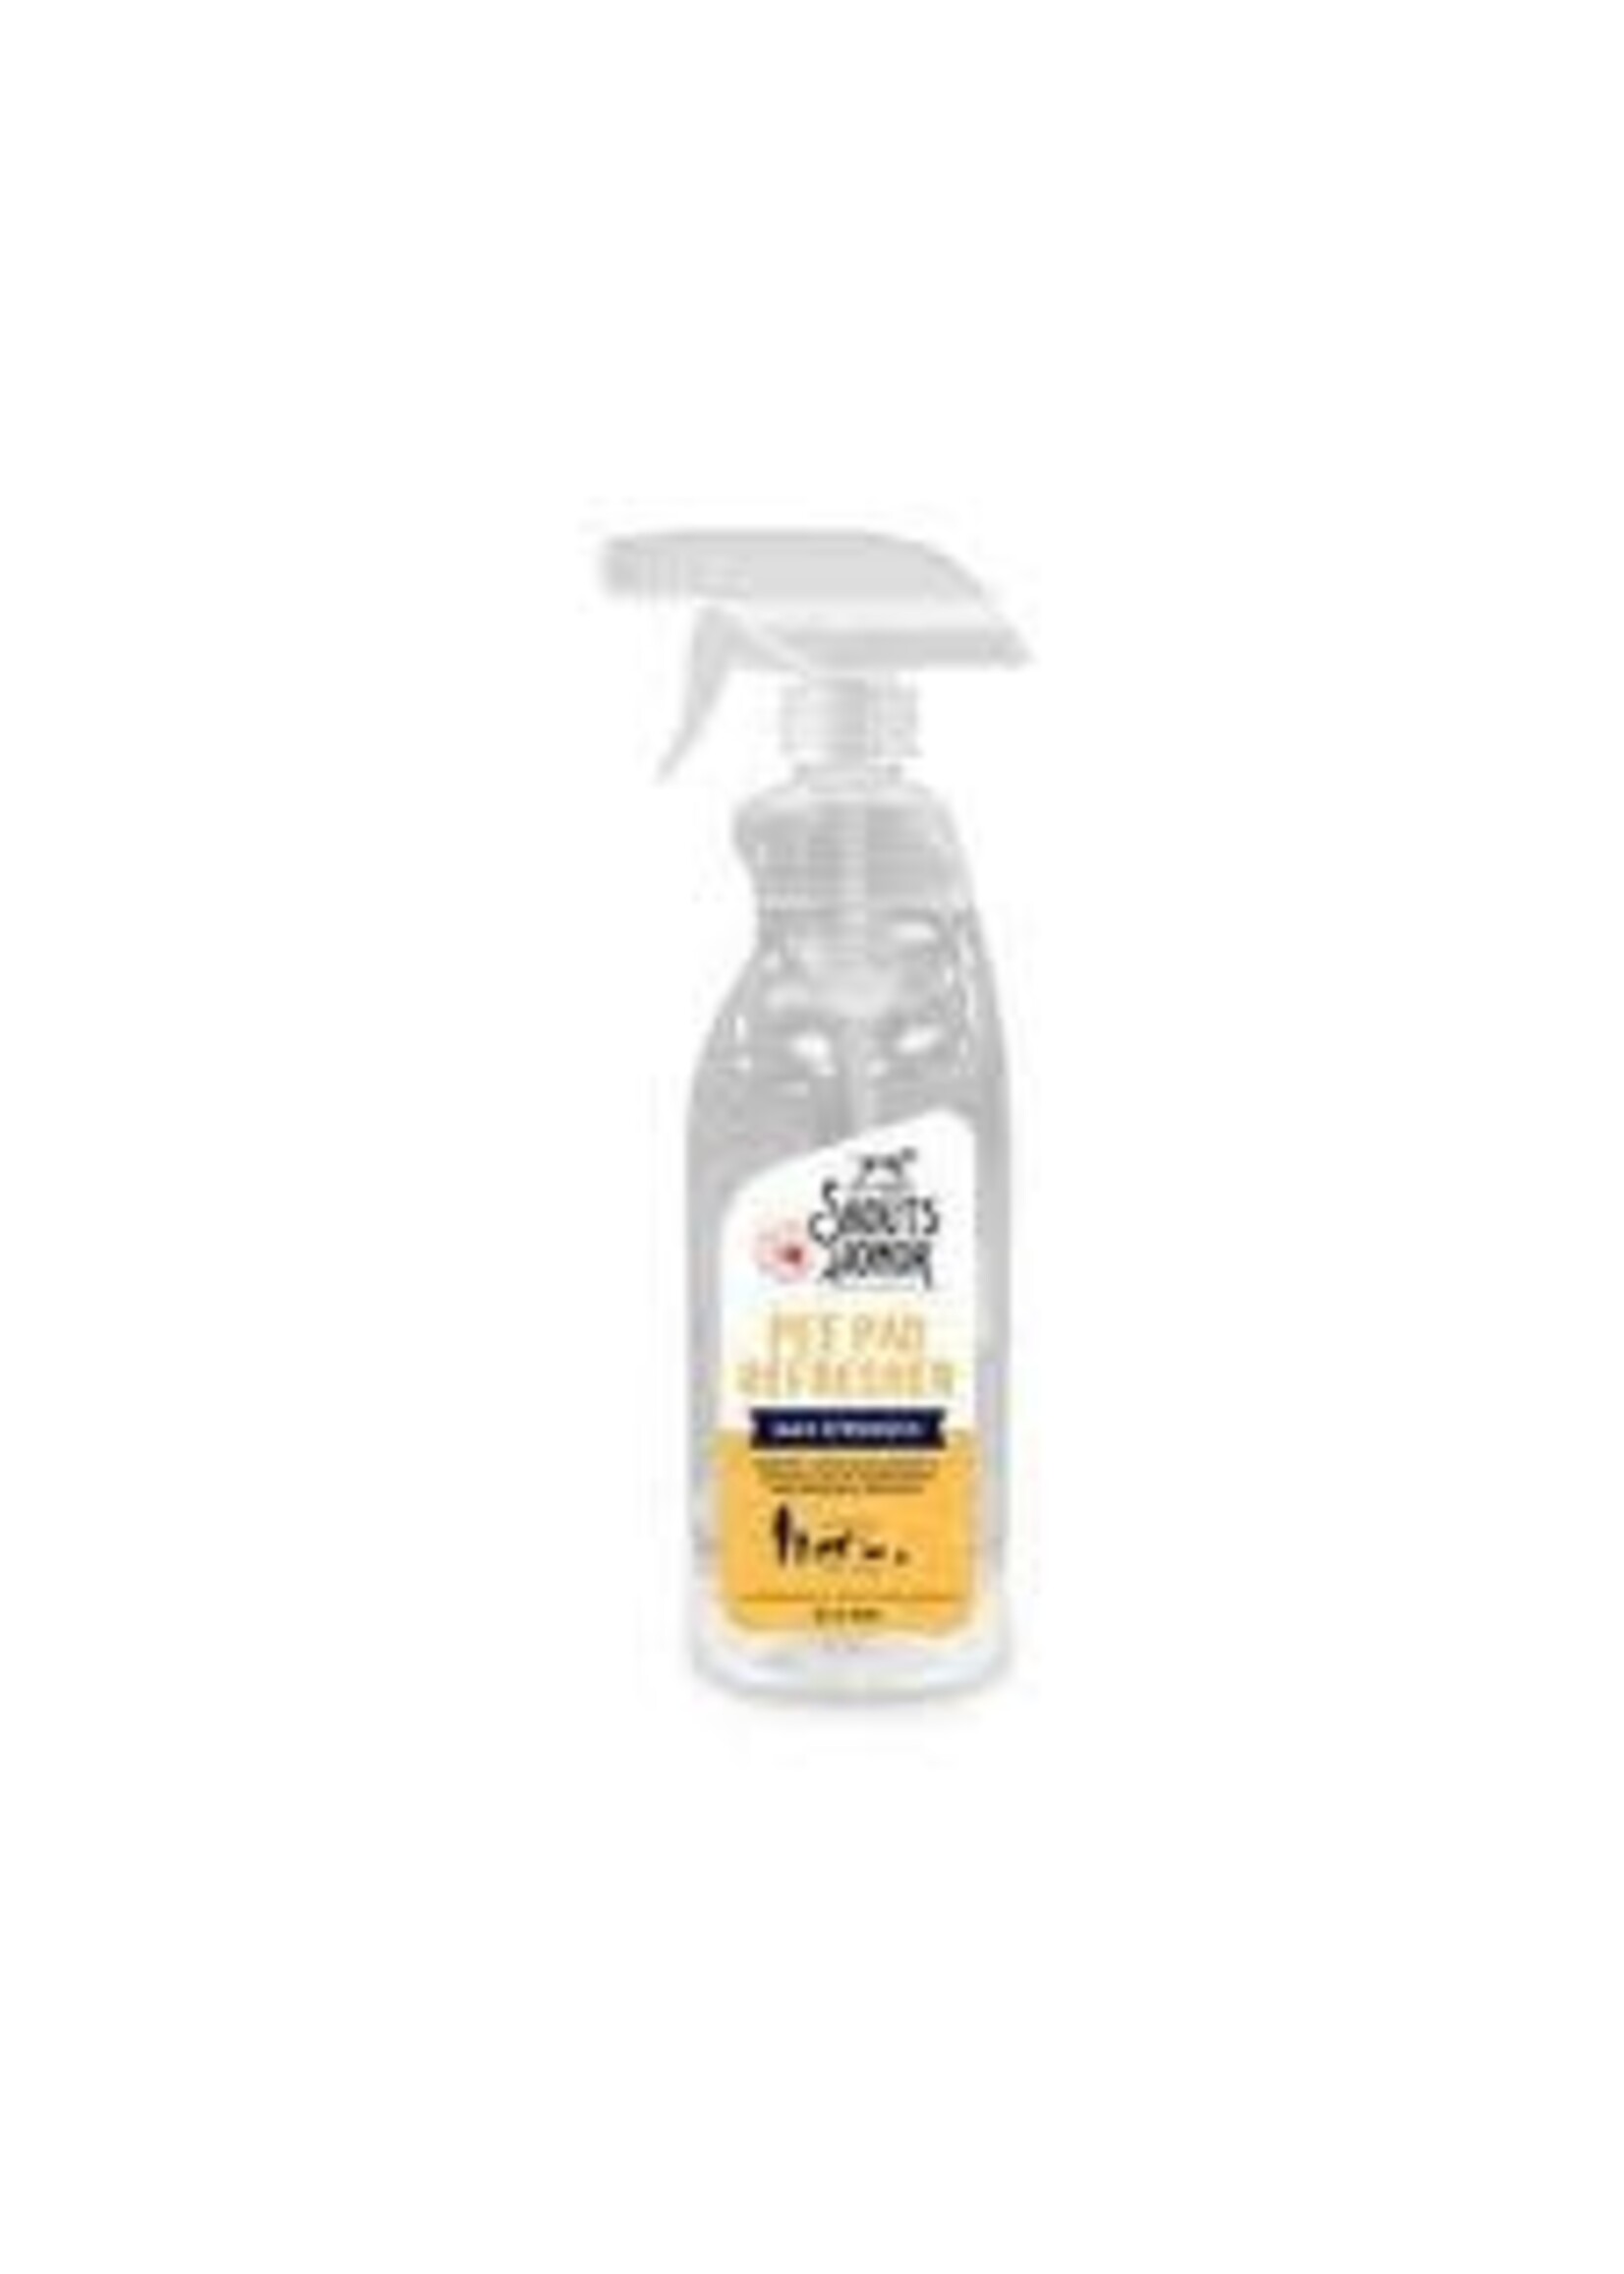 Skout's Honor Skout's Honor Pee Pad Refresher 28oz Spray